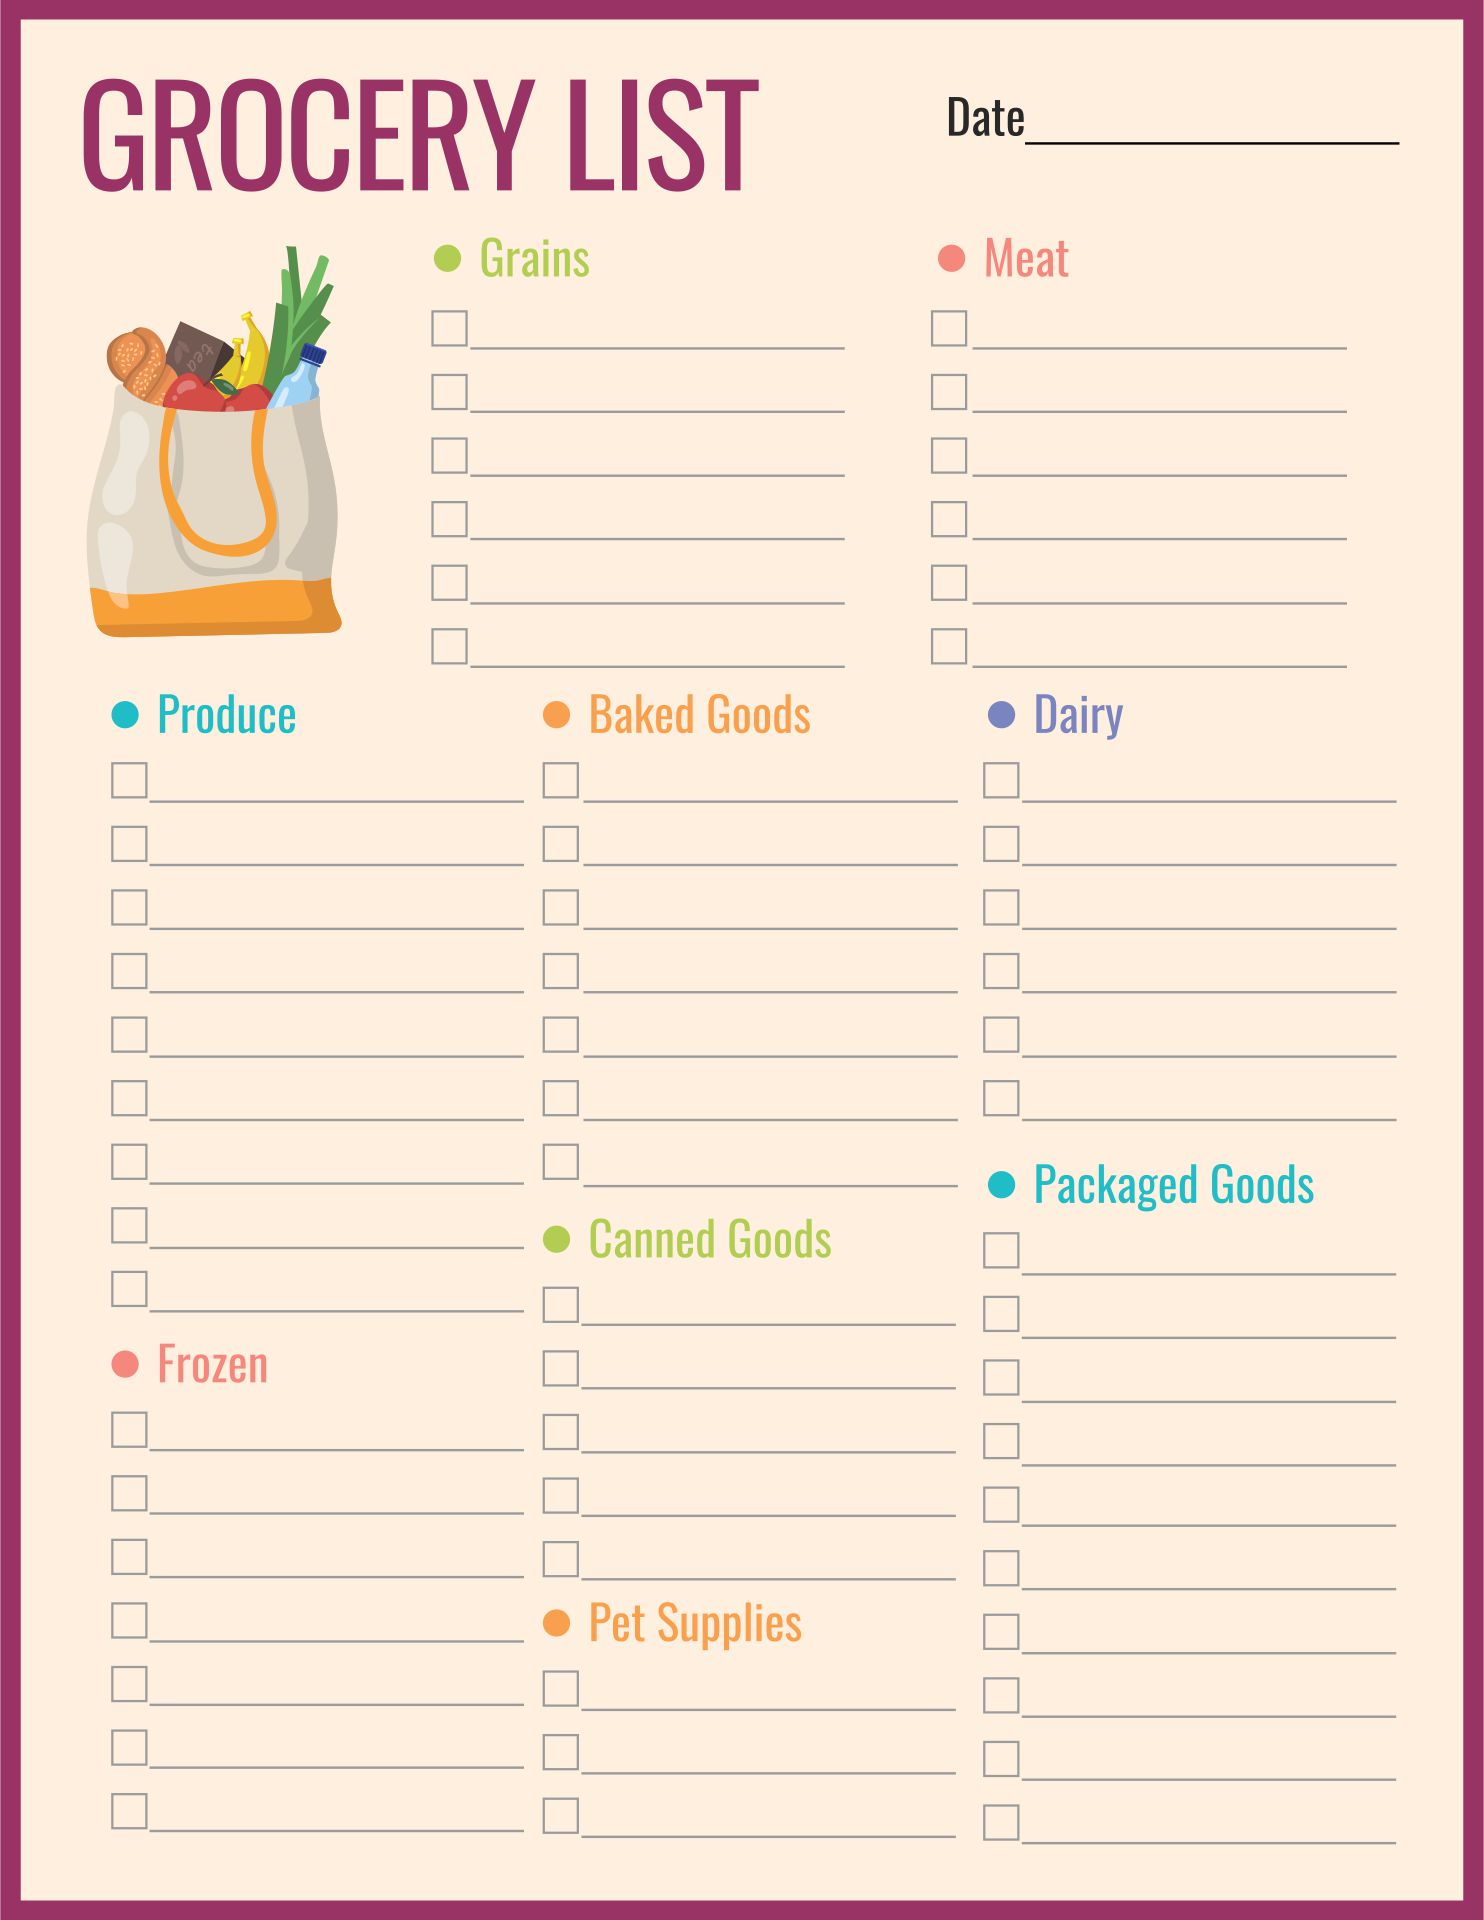 7-best-images-of-editable-blank-printable-checklists-8-shopping-list